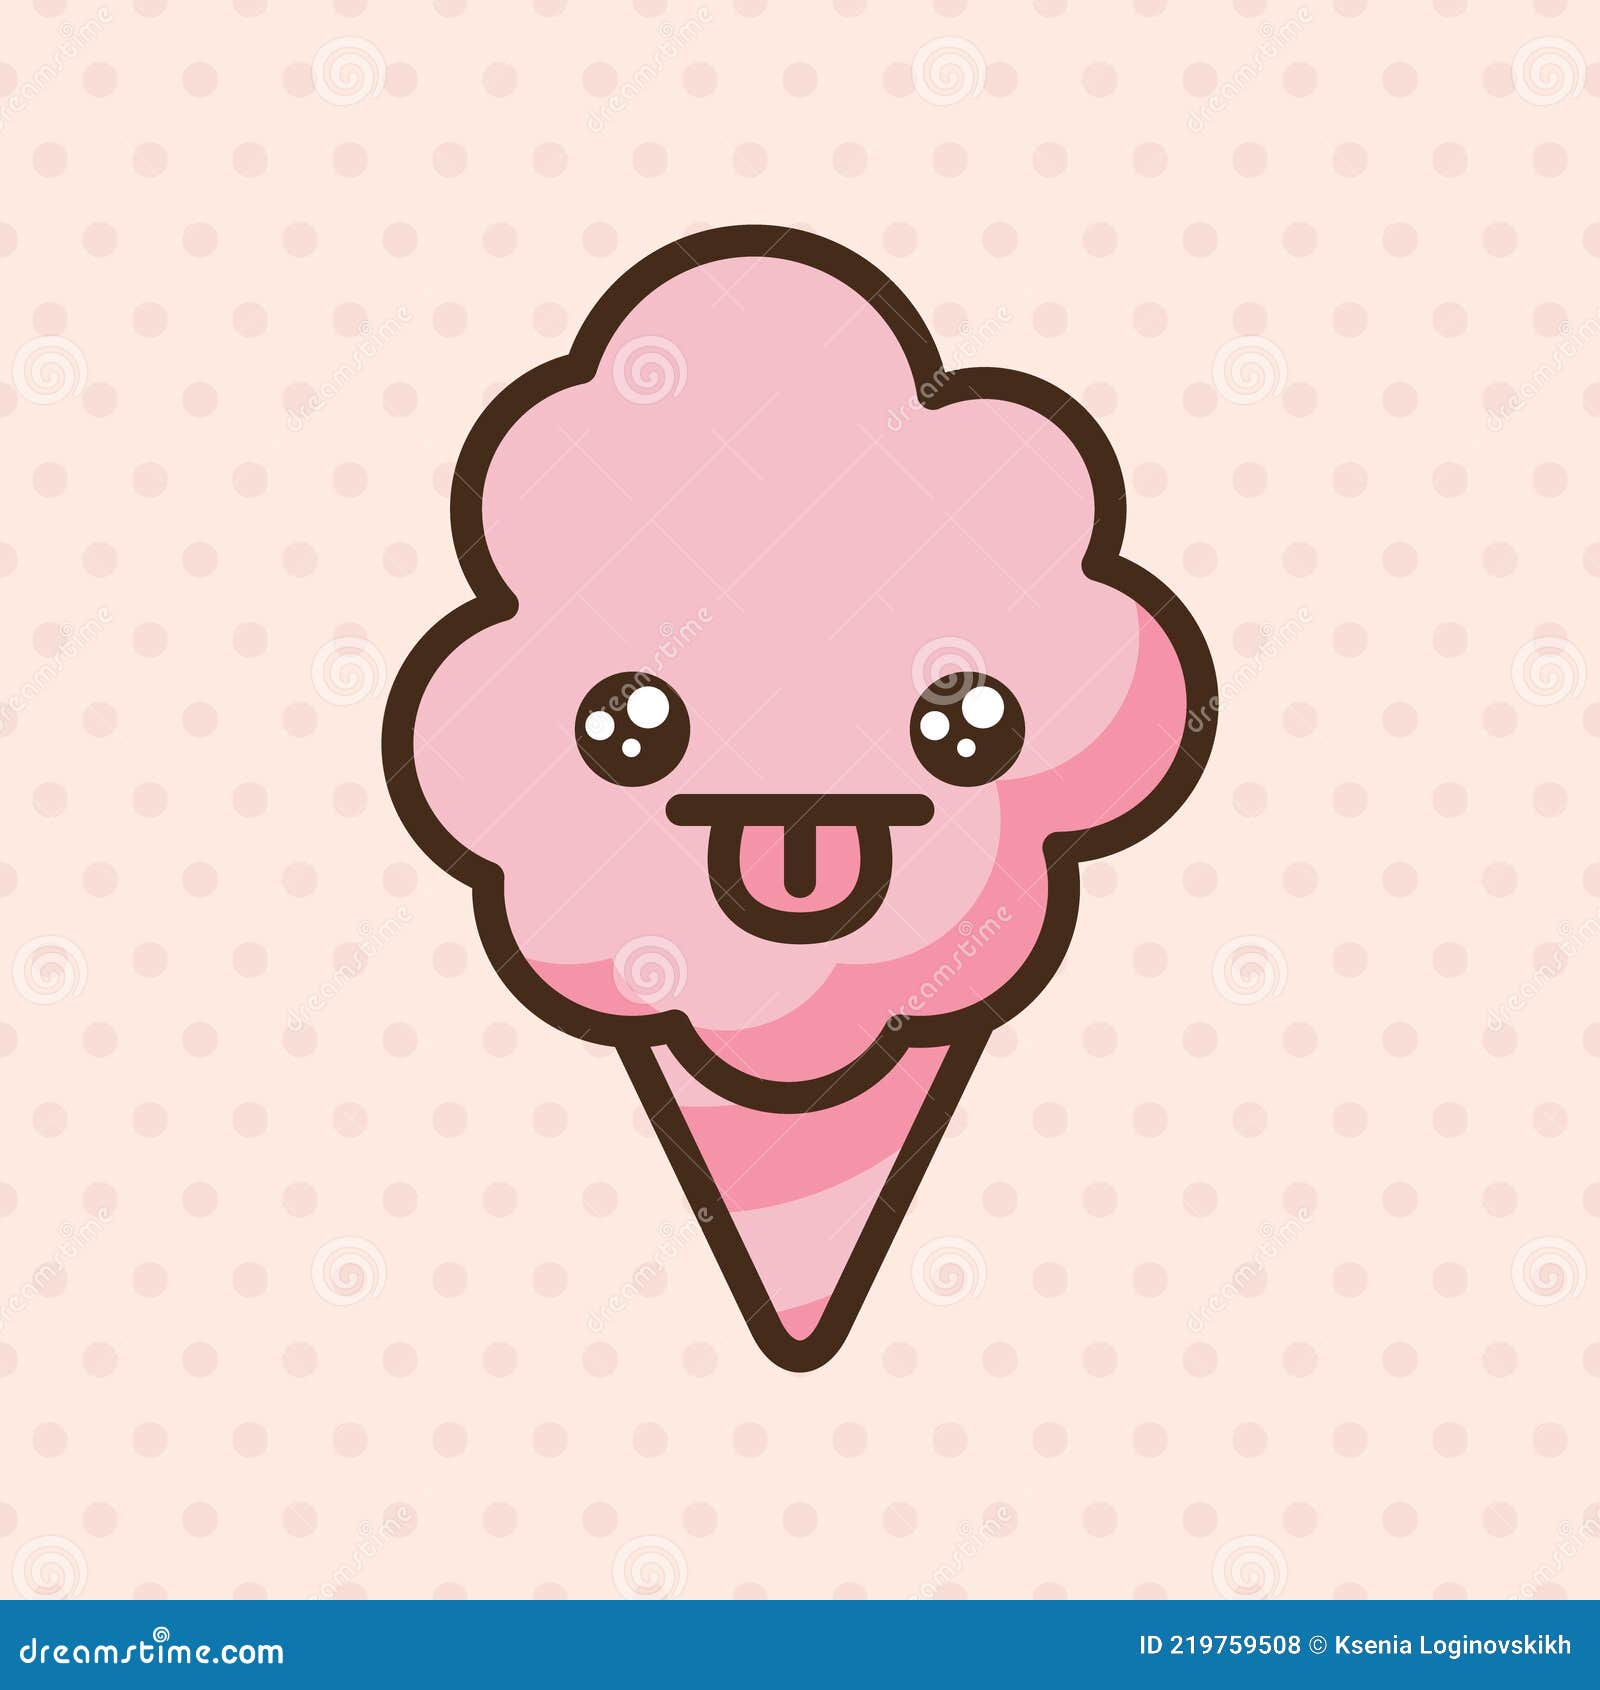 Pin by Joud on Anime | Cotton candy cookies, Cookie run, Anime